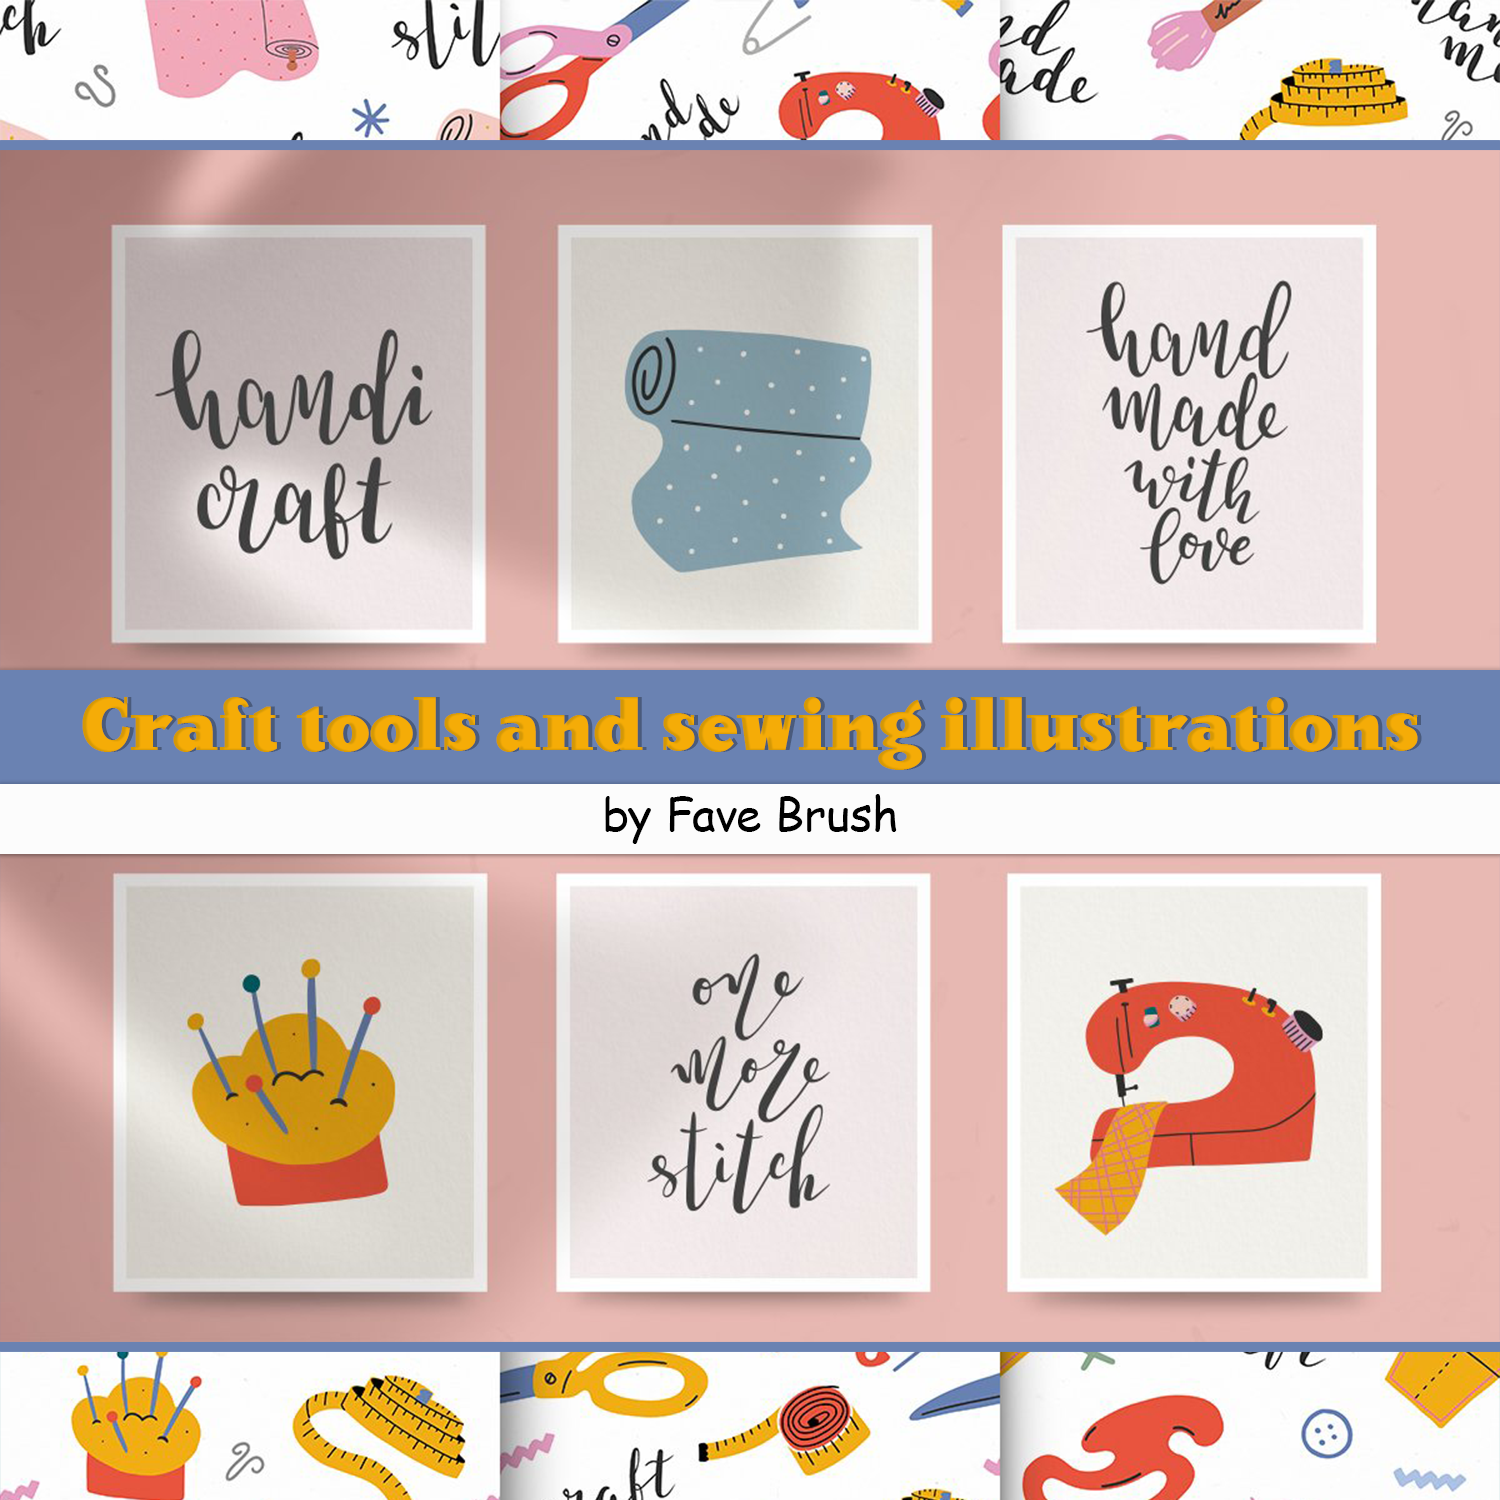 Craft tools and sewing illustrations for facebook.